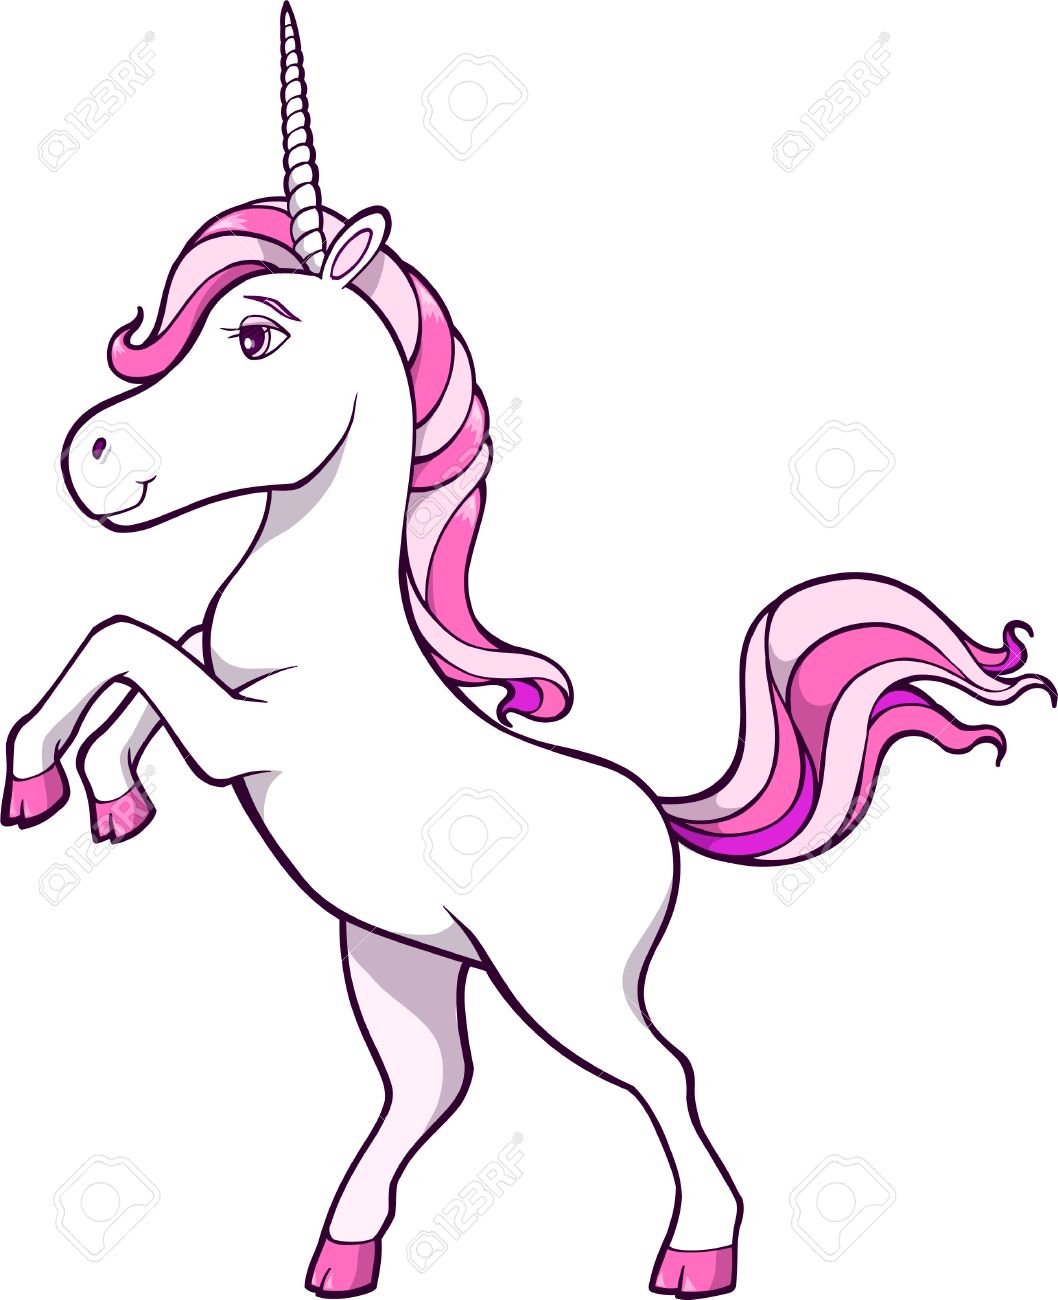 Download Free png Unicorn Vector Illustration Royalty Free